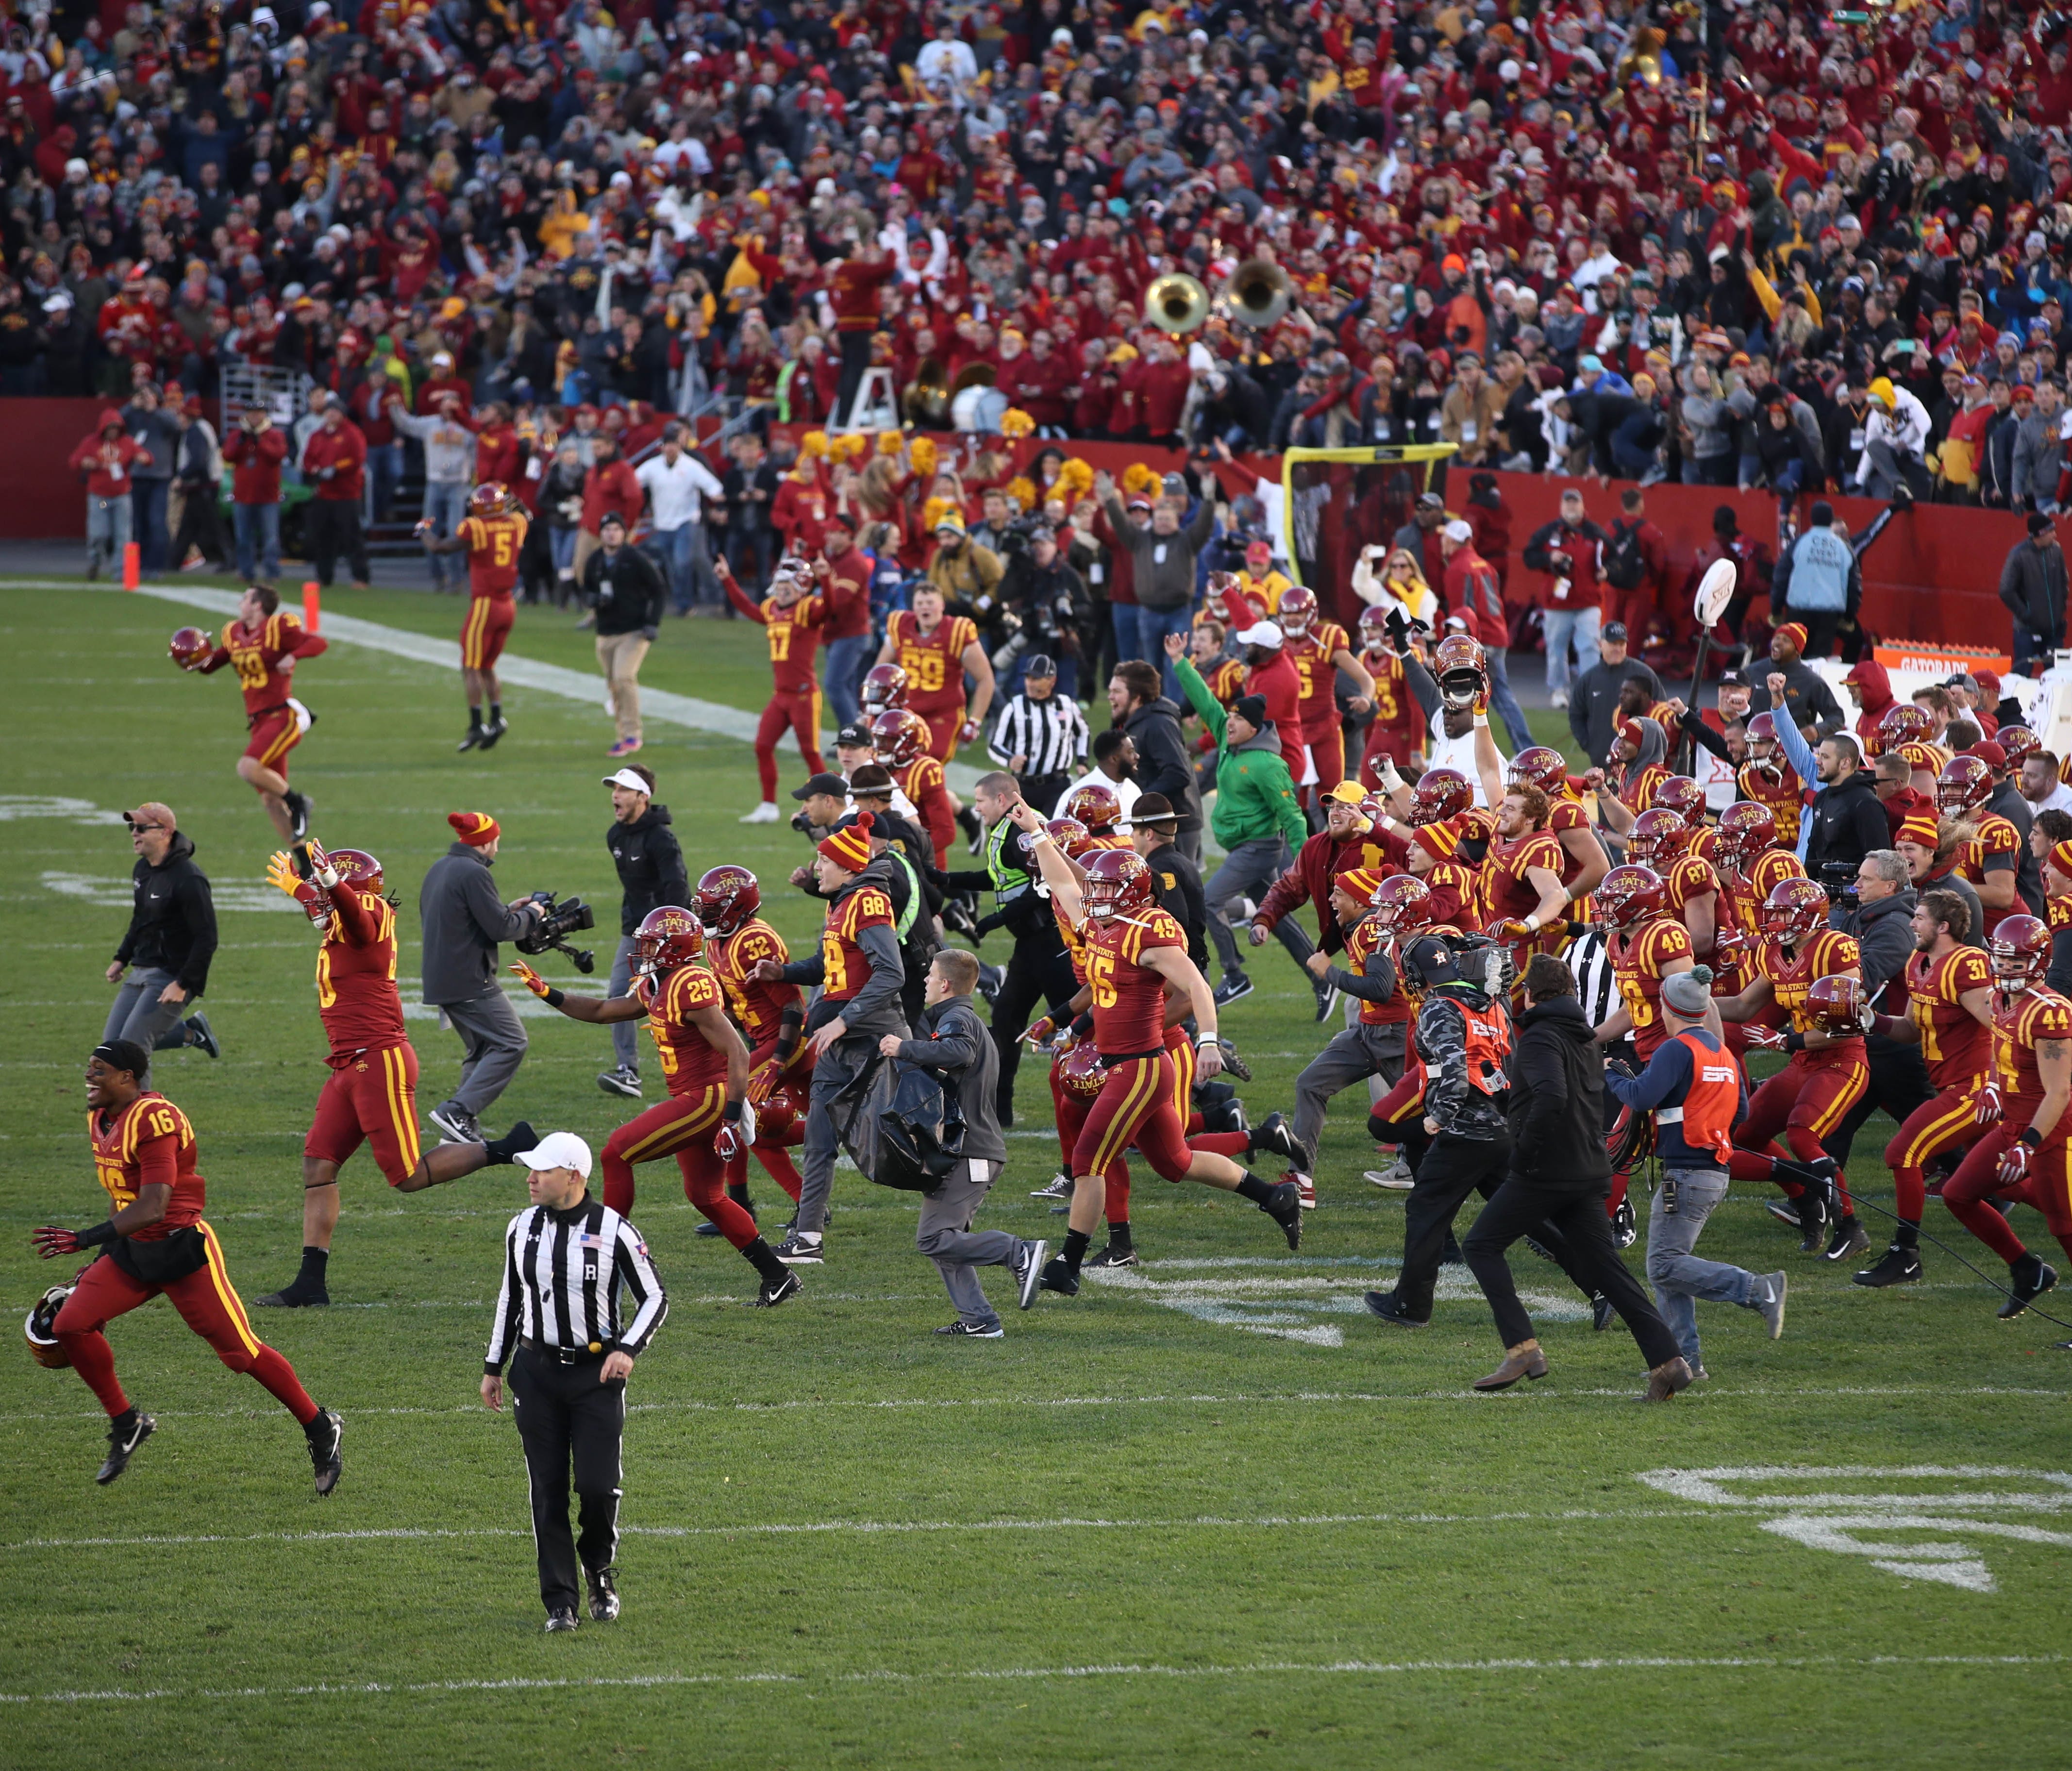 Iowa State Cyclones players rush the field after beating the TCU Horned Frogs at Jack Trice Stadium.